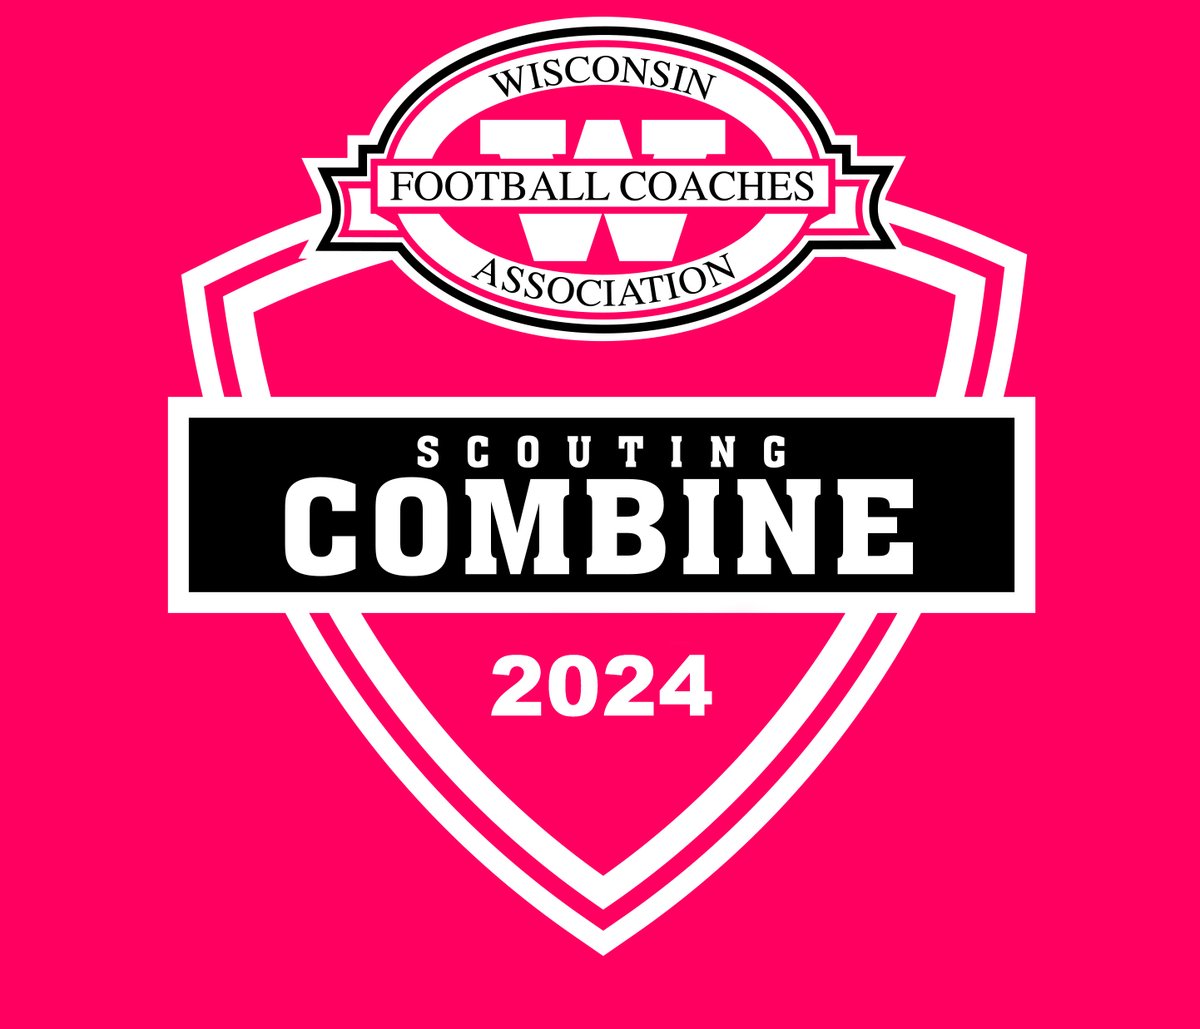 You can find the schedule, info, and attendee list for the 2024 WFCA Combine below: wifca.org/news_article/s…